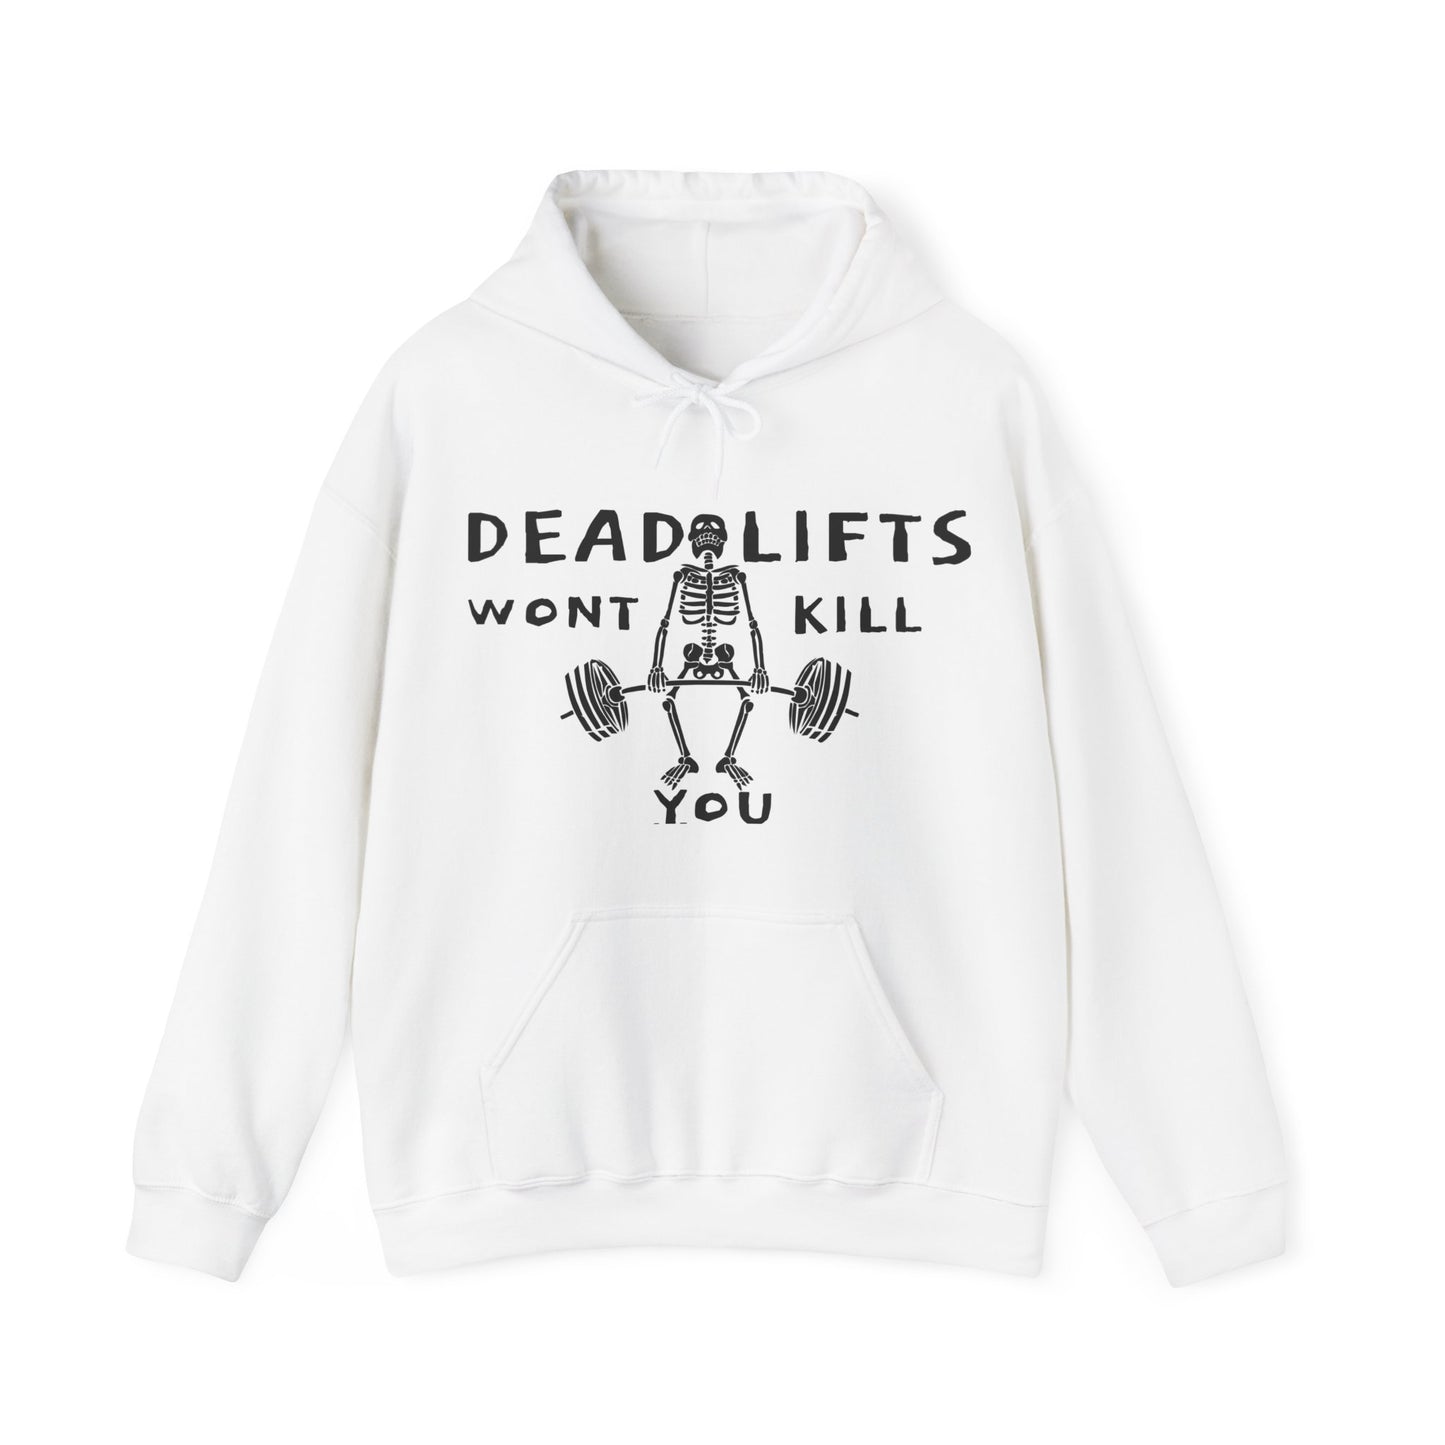 Deadlifts Wont Kill You Workout Jacked Skeleton Weight Lifting Funny White Long Sleeve Unisex Gym Humor Happy Halloween Spooky Season Hoodie